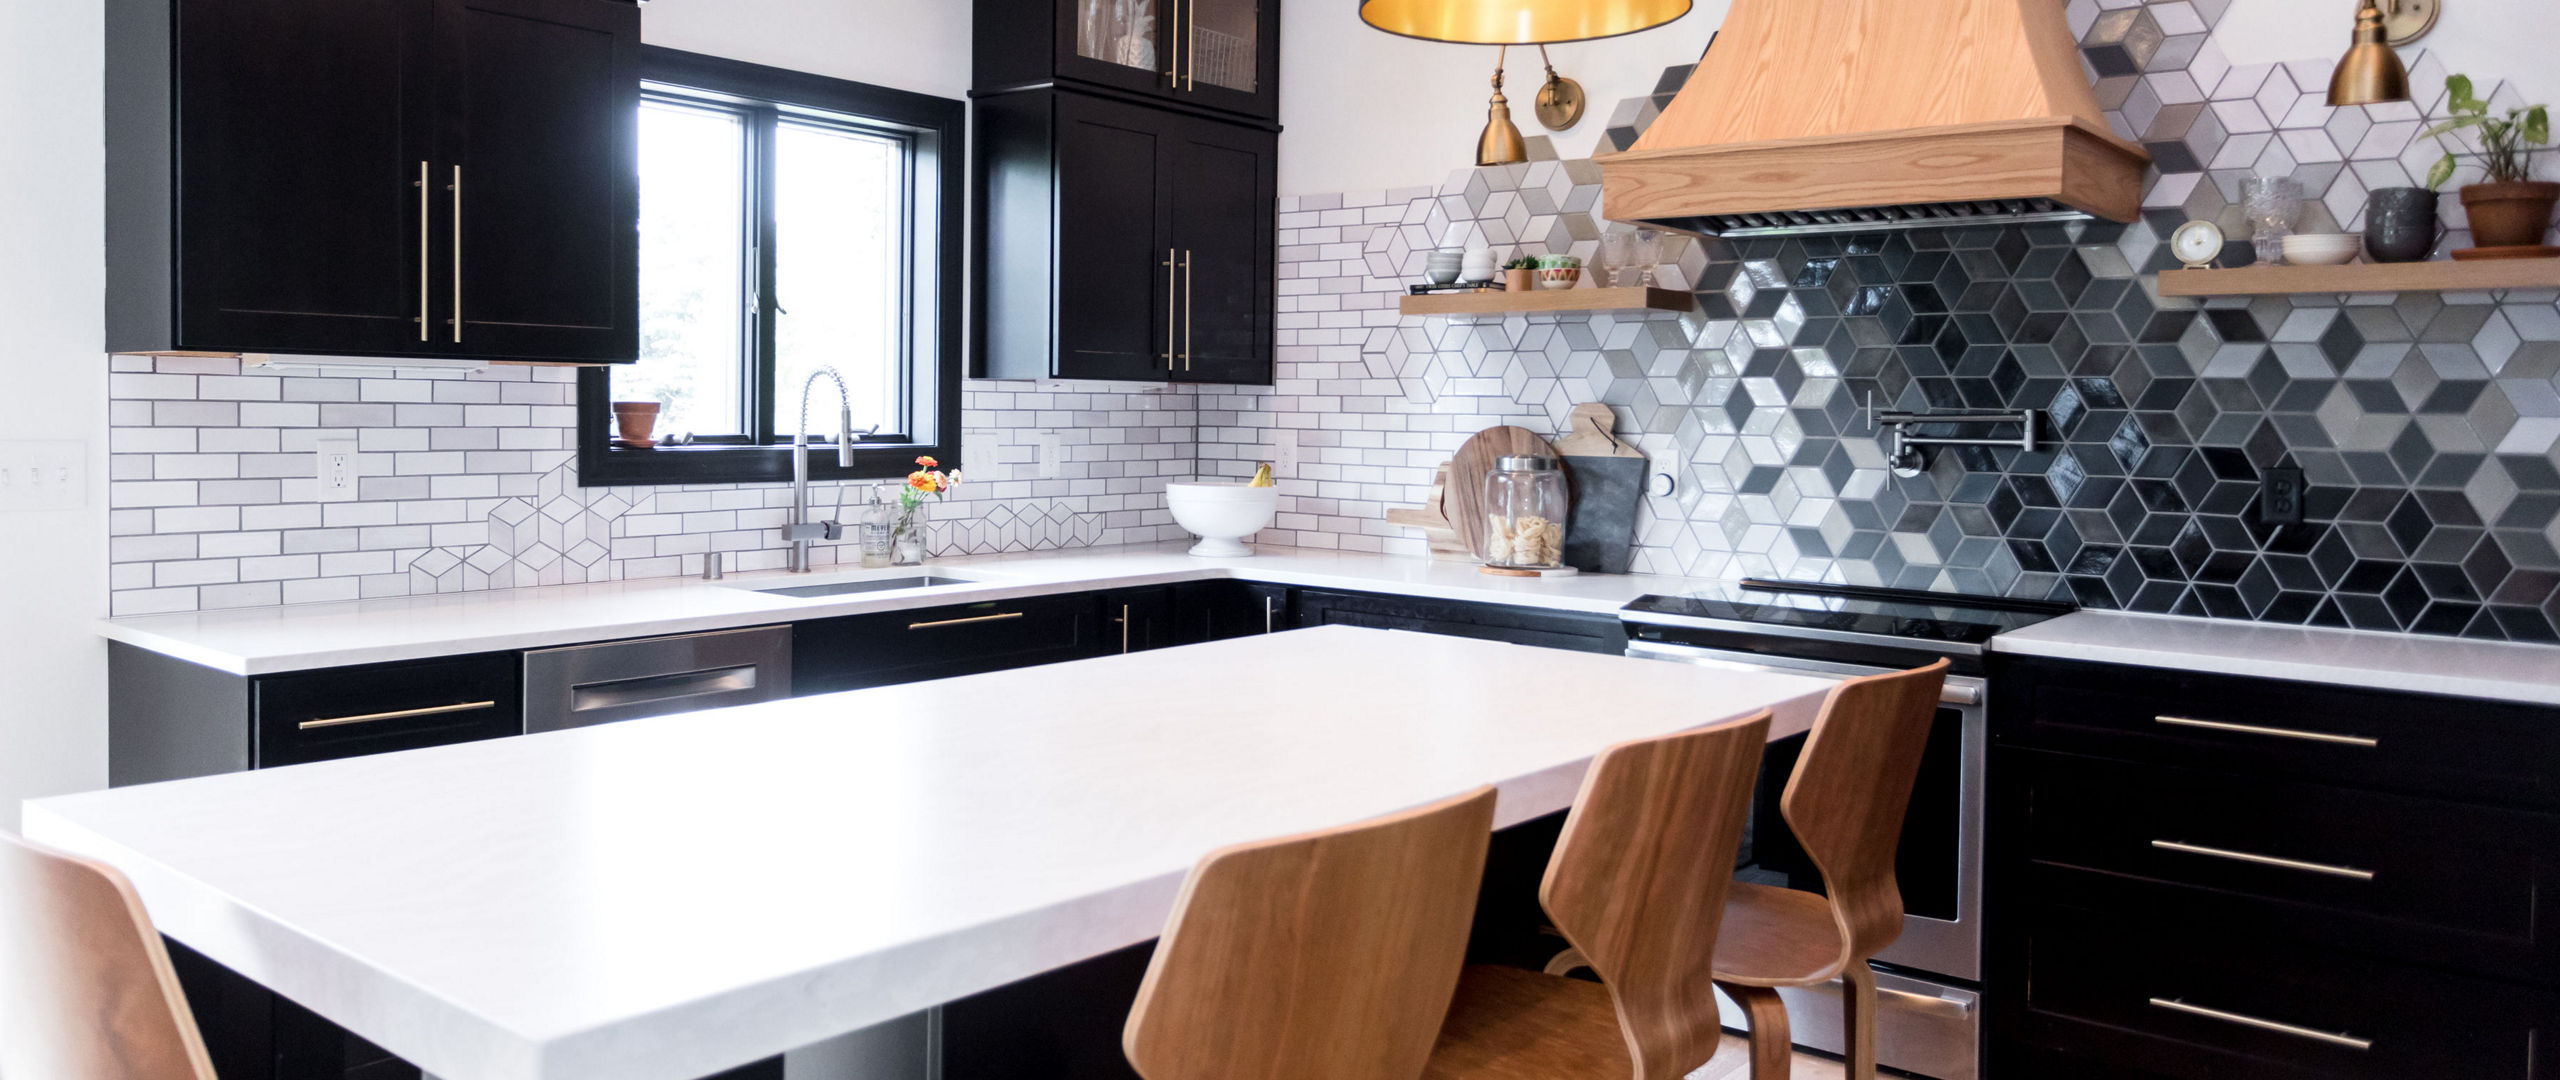 a black and white kitchen with black cabinets topped with white quartz countertops, a center island with 4 wooden barstools, a wooden hood over the range, and a black and white ombre hexagonal backsplash